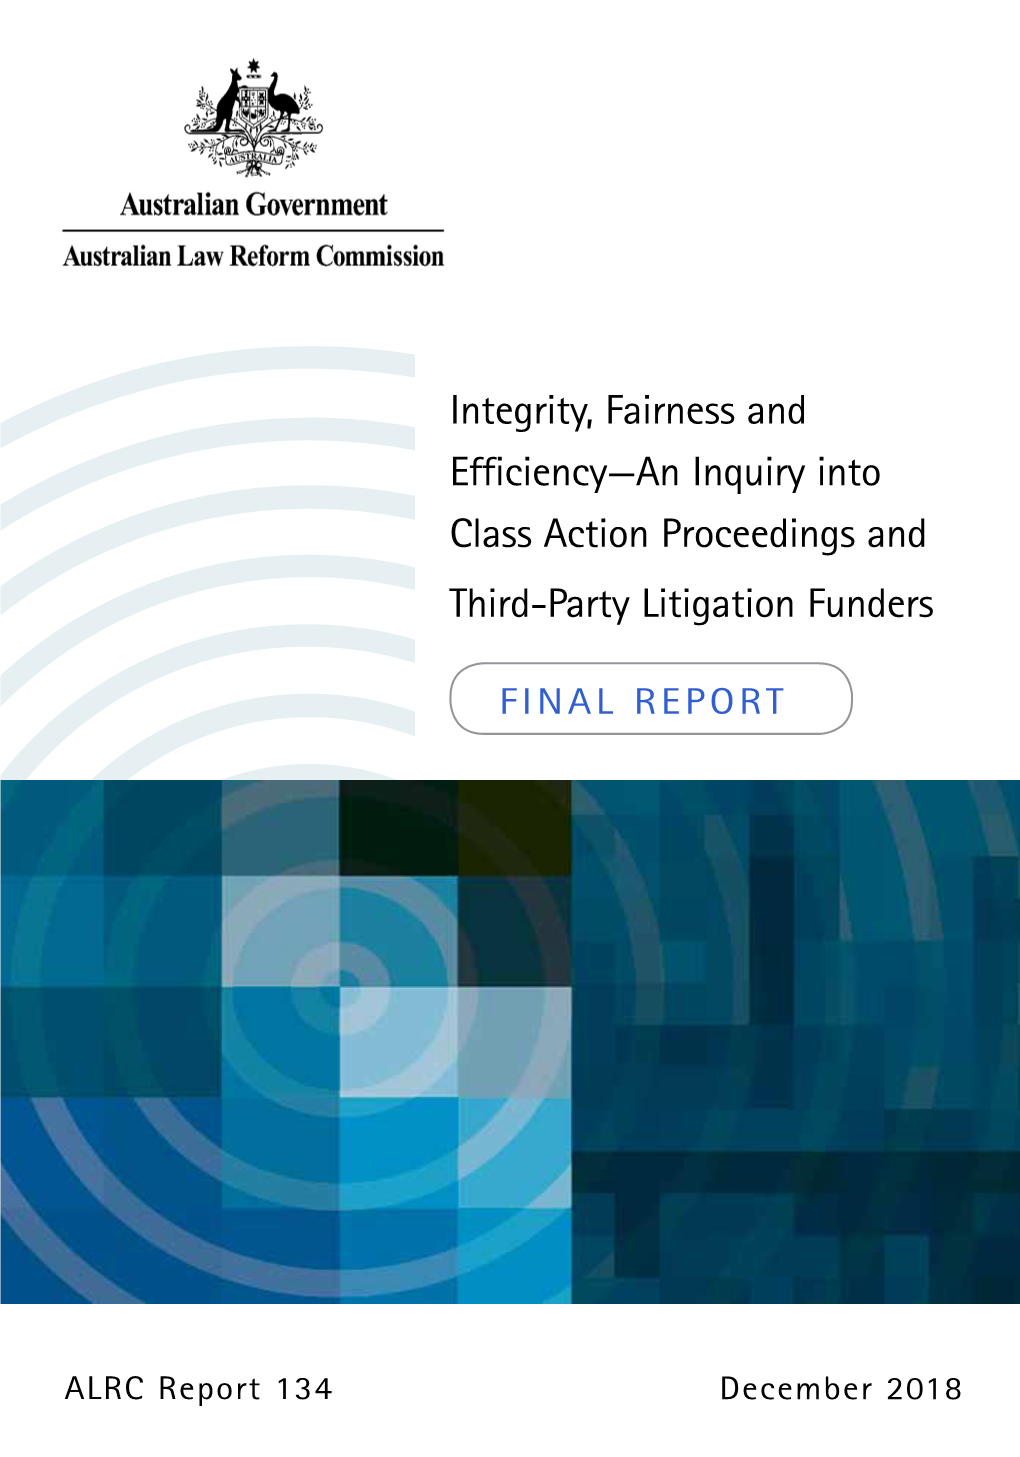 Integrity, Fairness and Efficiency-An Inquiry Into Class Action